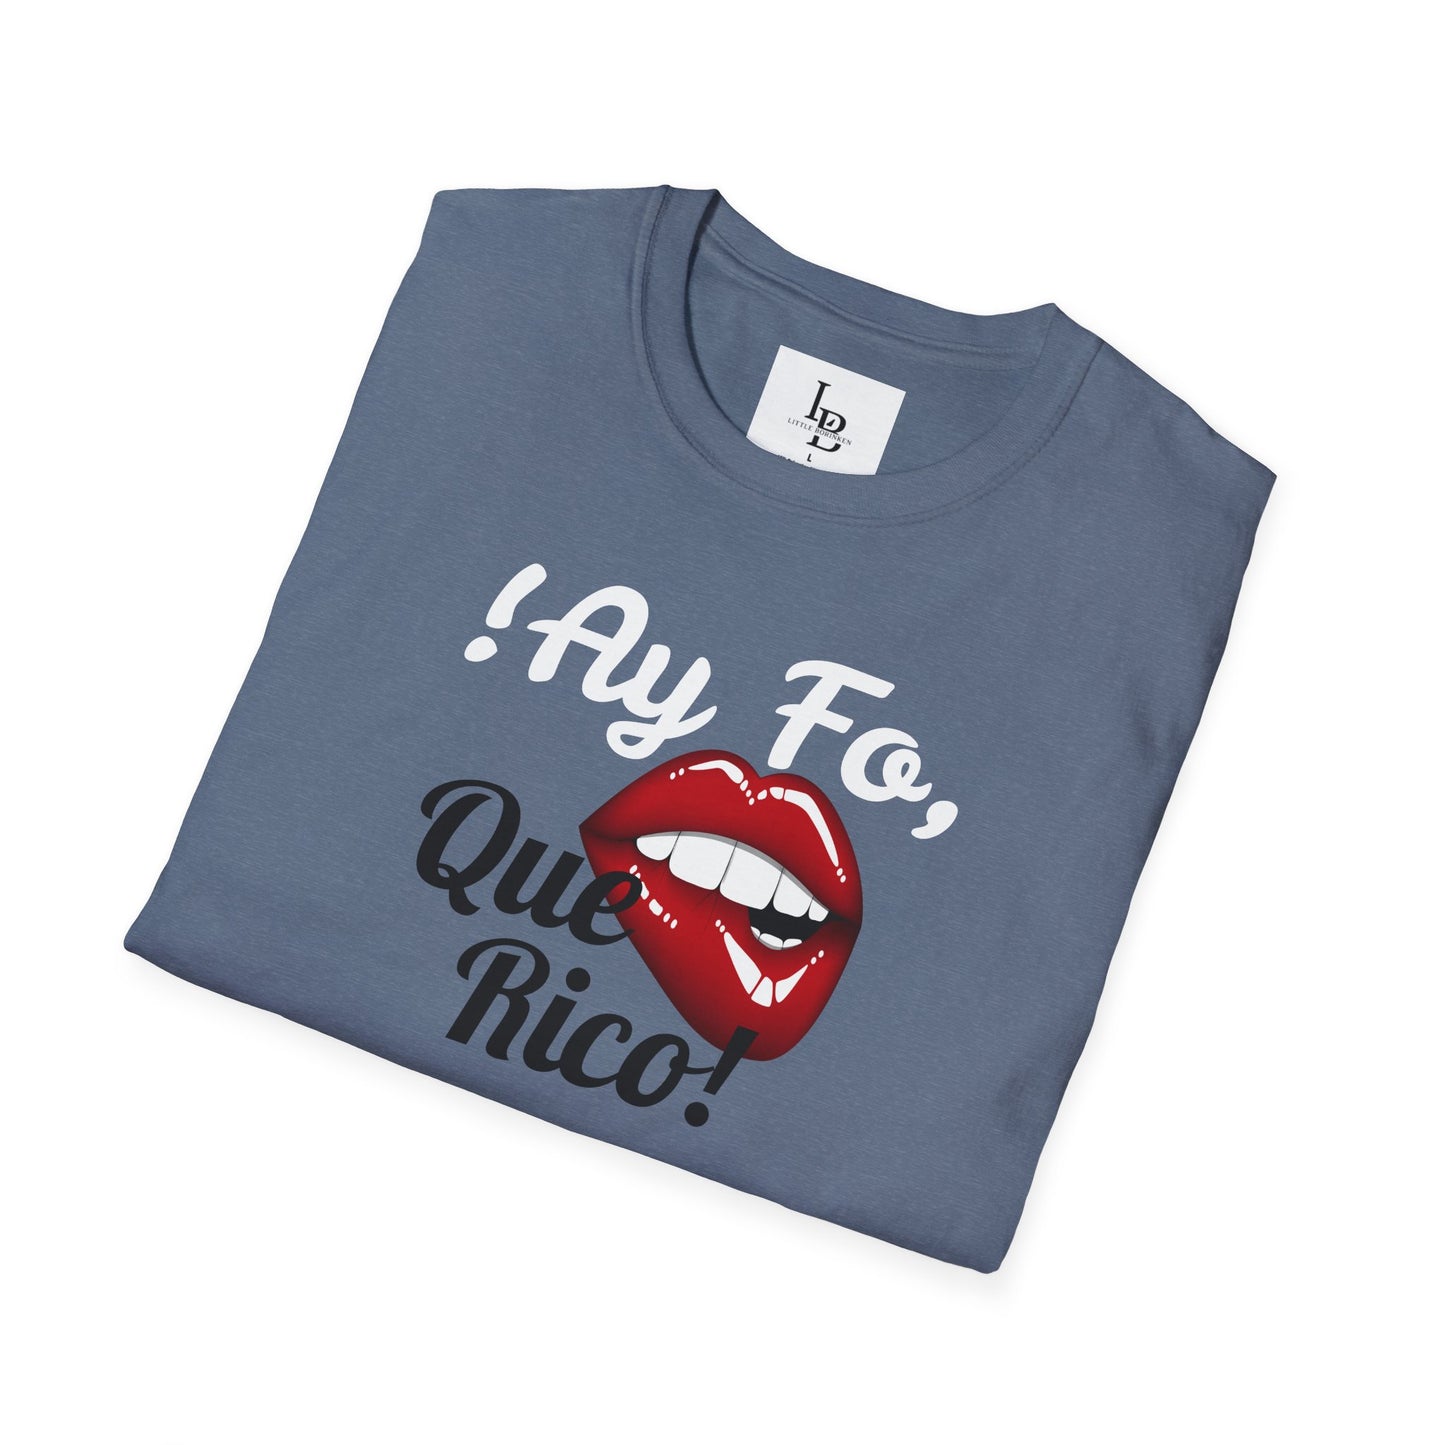 !Ay Fo, Que Rico!, Unisex Softstyle T-Shirt